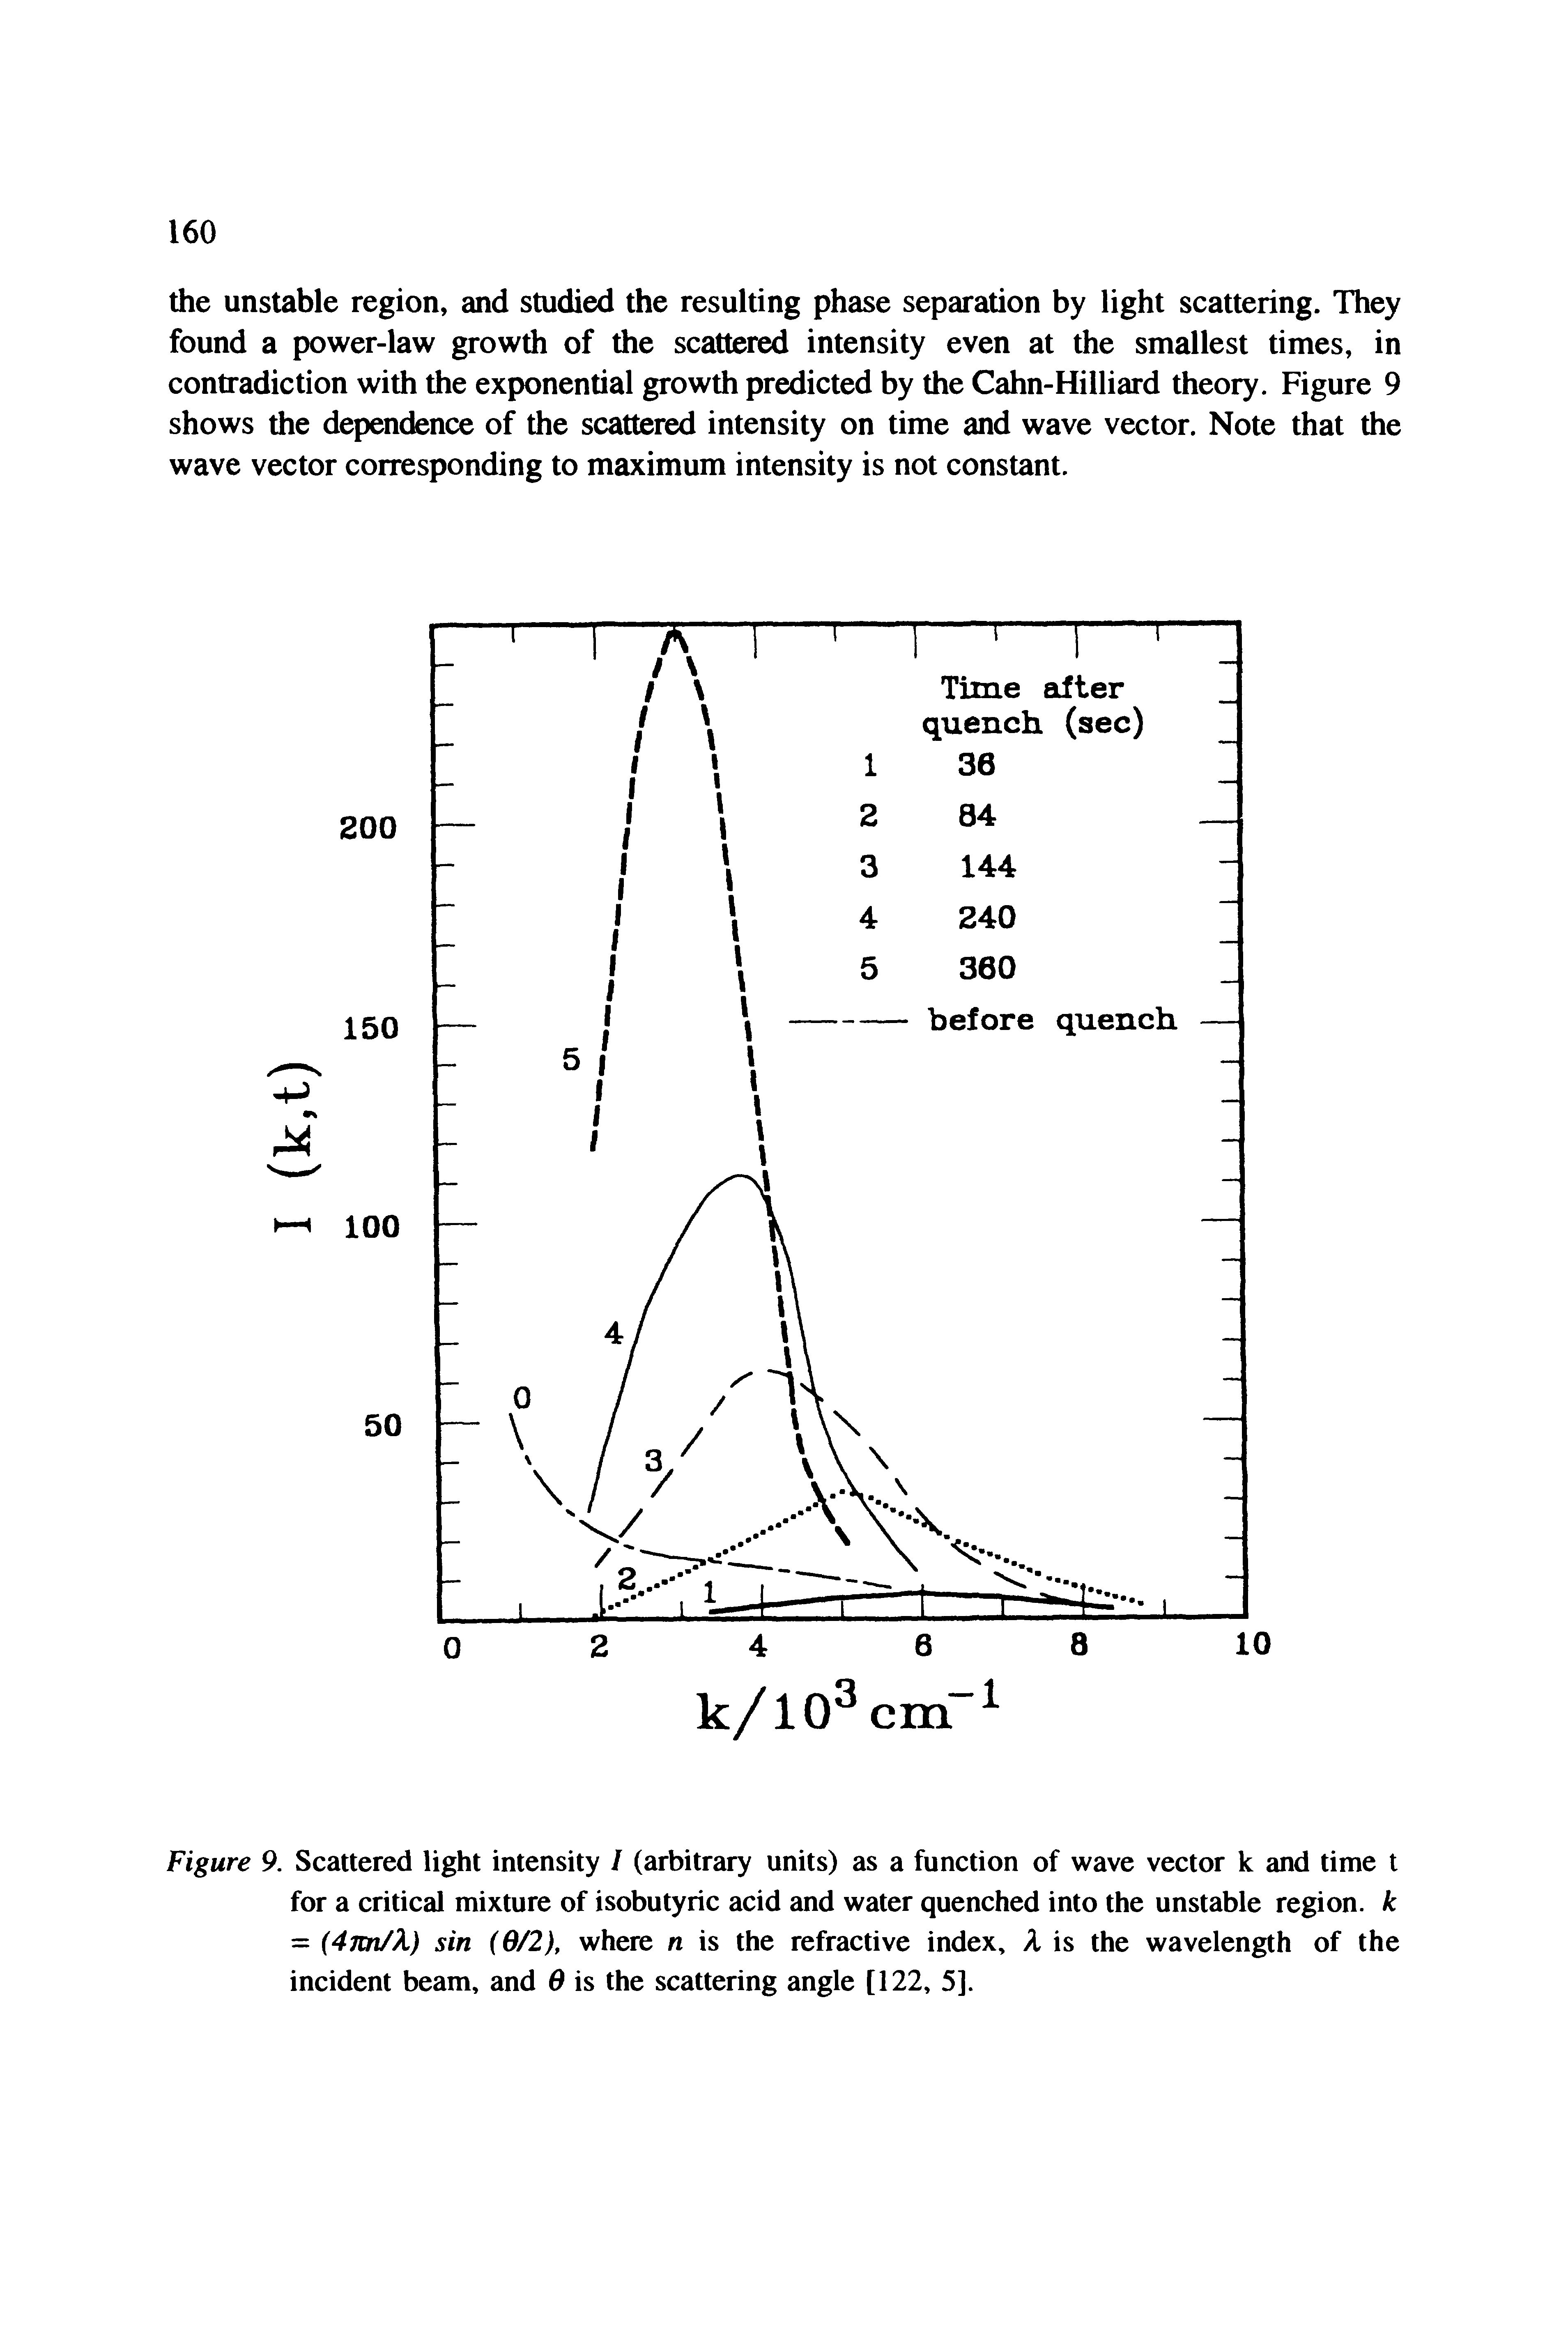 Figure 9. Scattered light intensity / (arbitrary units) as a function of wave vector k and time t for a critical mixture of isobutyric acid and water quenched into the unstable region, k = 47tn/k) sin (6/2), where n is the refractive index, A is the wavelength of the incident beam, and 6 is the scattering angle [122, 5].